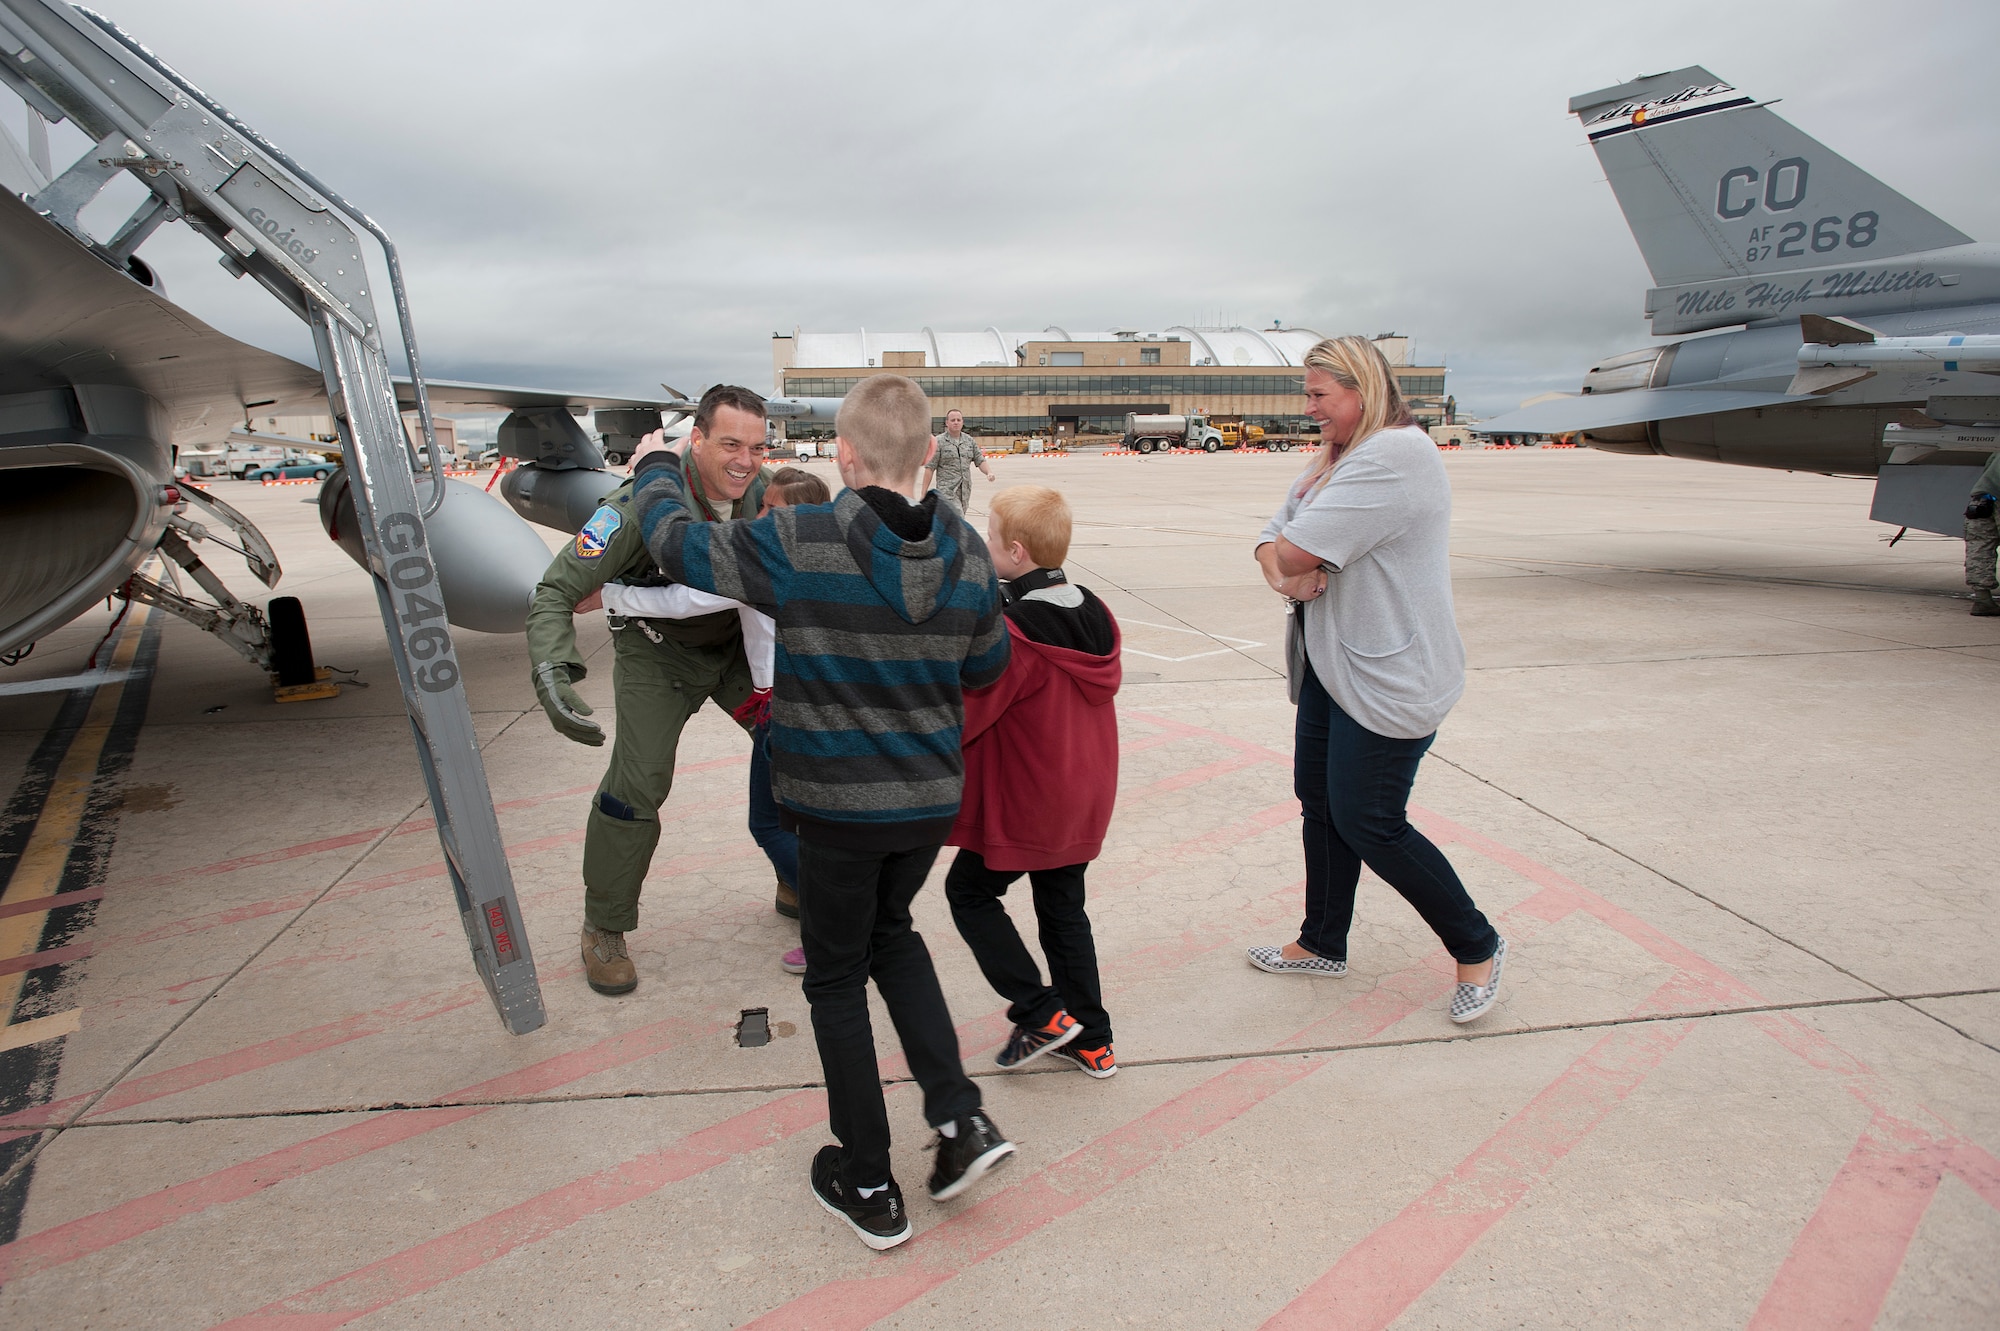 U.S. Air Force Lt. Col. Kurt Tongren???s family welcomes him home after landing an F-16 Fighting Falcon from the 120th Fighter Squadron, Colorado Air National Guard, at Buckley Air Force Base, Colo., upon his return from a deployment to the Republic of Korea, May 19, 2015. Integrating with other U.S. Air Force members, flying daily training mission and providing a Theater Security Package for the past 90 days, this return home marks the completion of the seventh deployment for the "Redeyes" of the 120th FS along with the 140th Wing since Sept. 11, 2001. (U.S. Air National Guard photo by: Tech. Sgt. Wolfram M. Stumpf/RELEASED)